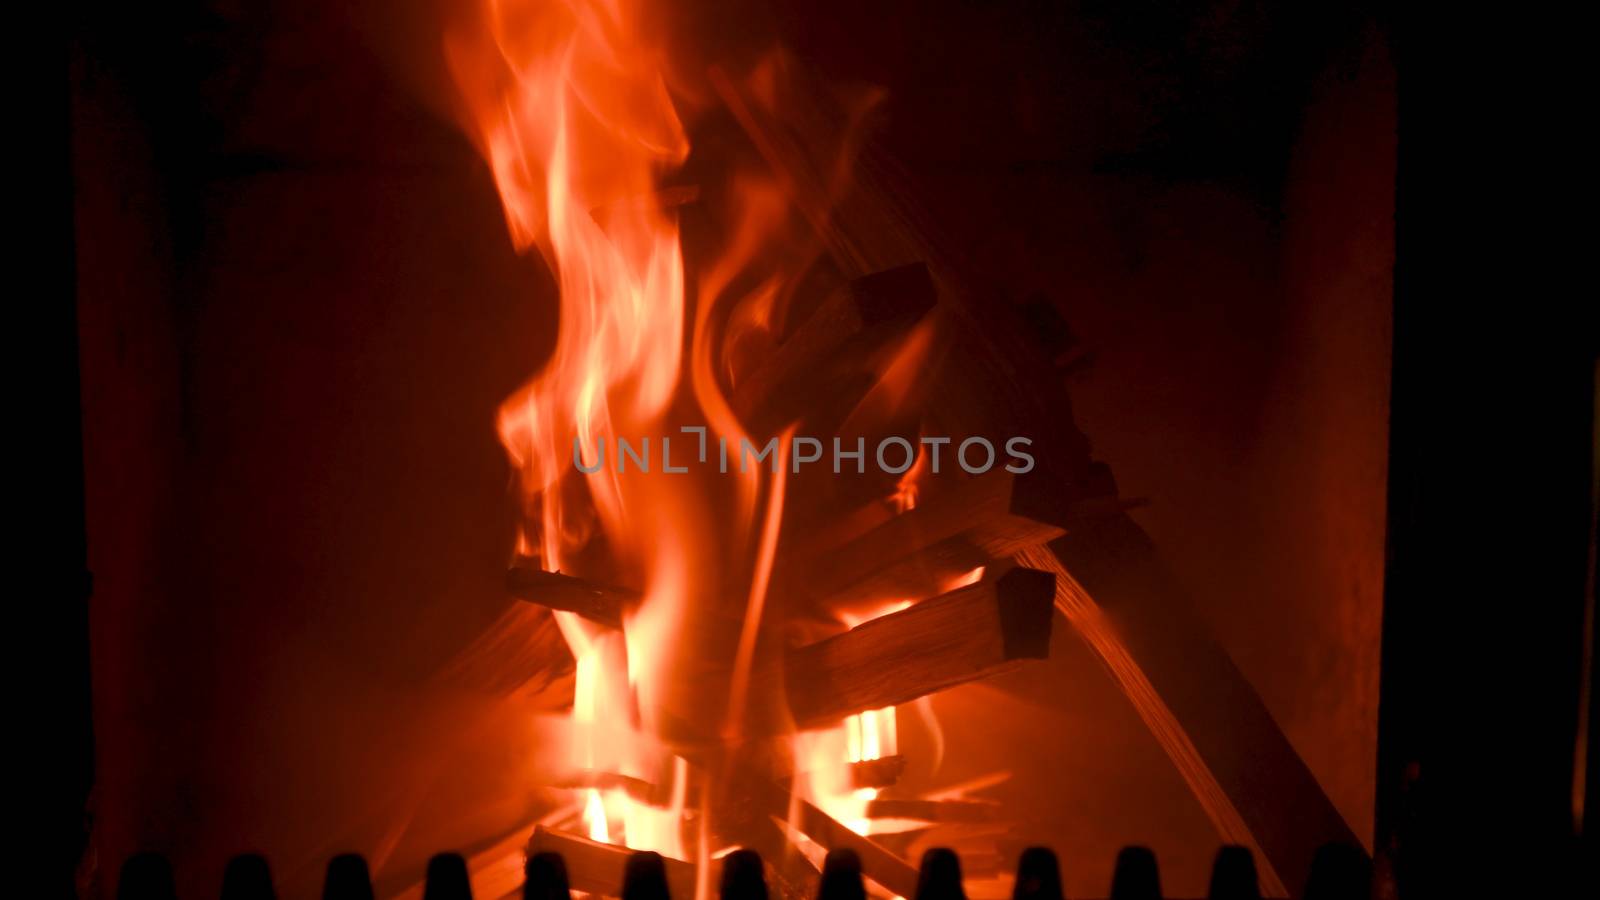 Fire in stove, close up, firewood burning, detail interior scene, winter concept